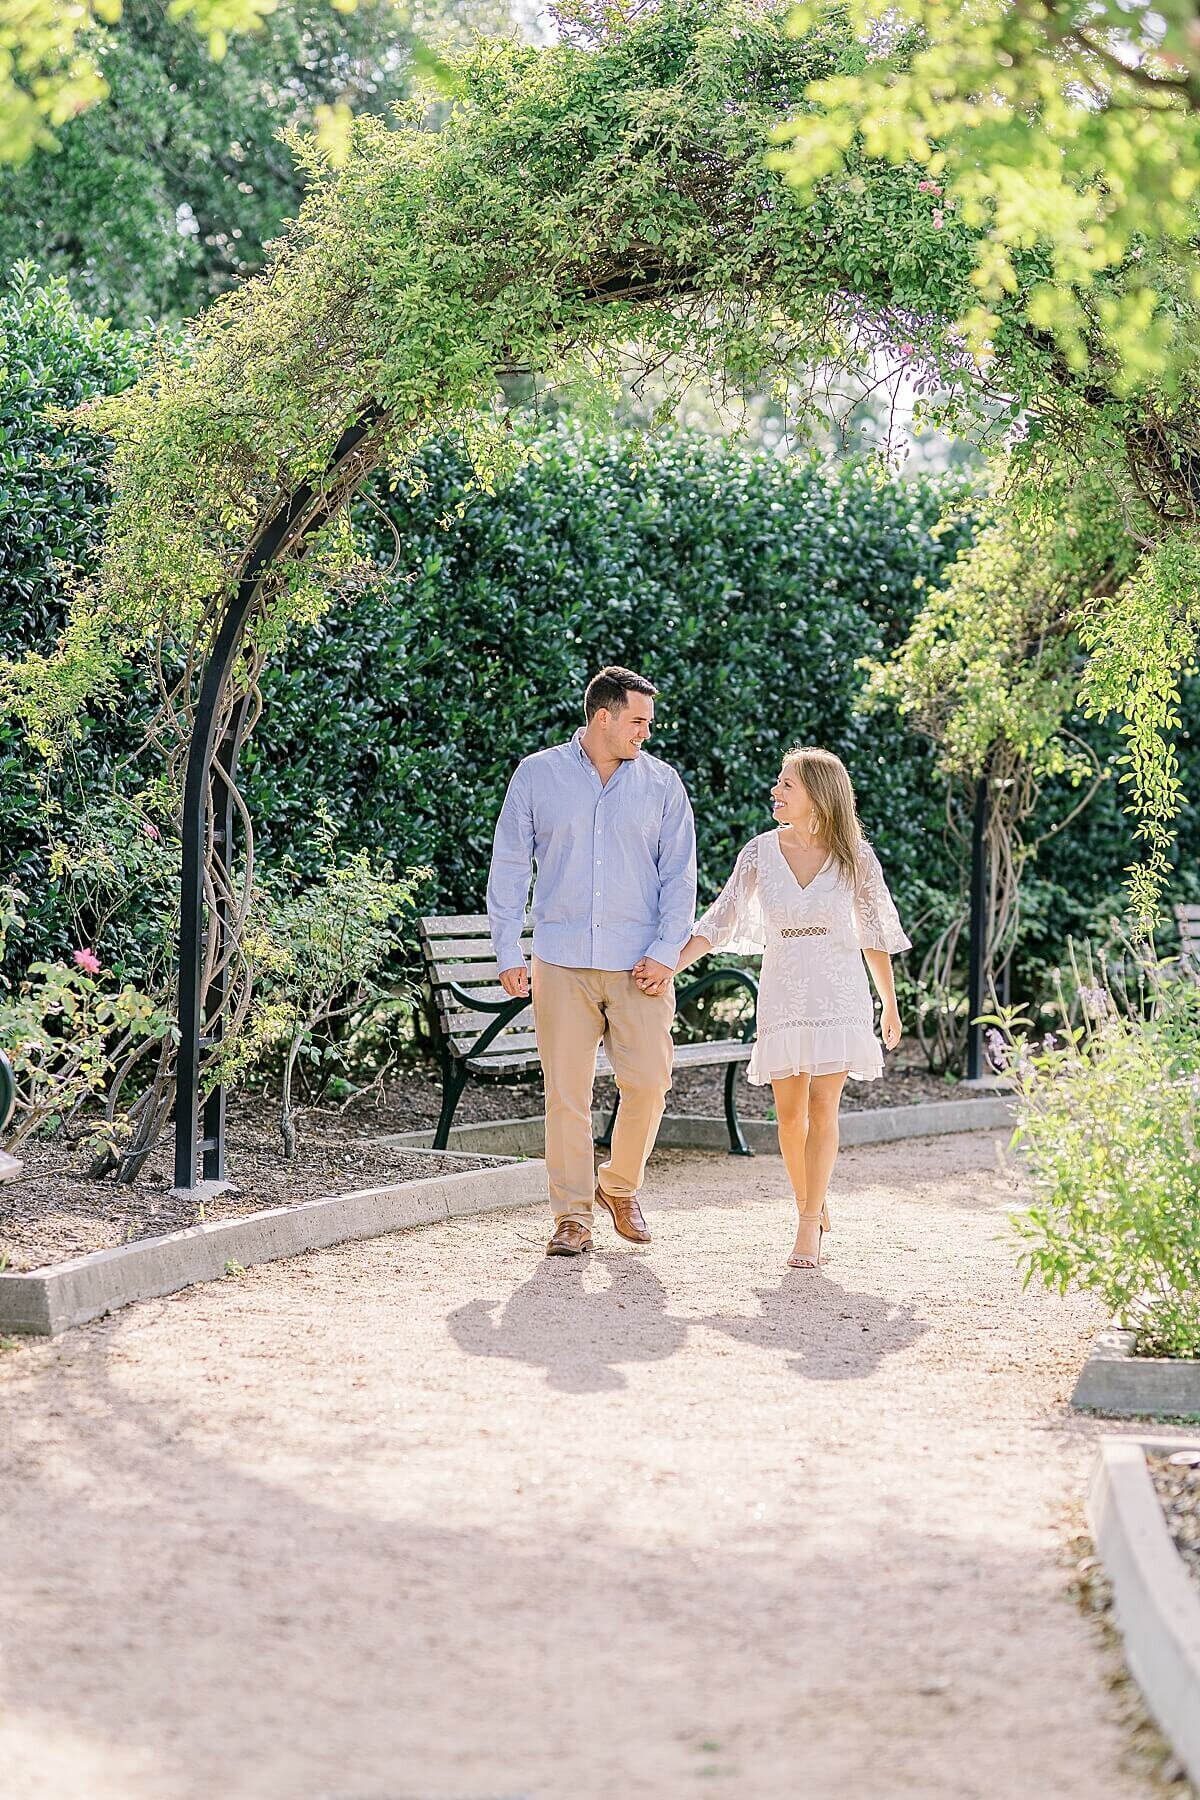 McGovern-Centennial-Gardens-Hermann-Park-Engagement-Session-Alicia-Yarrish-Photography_0038